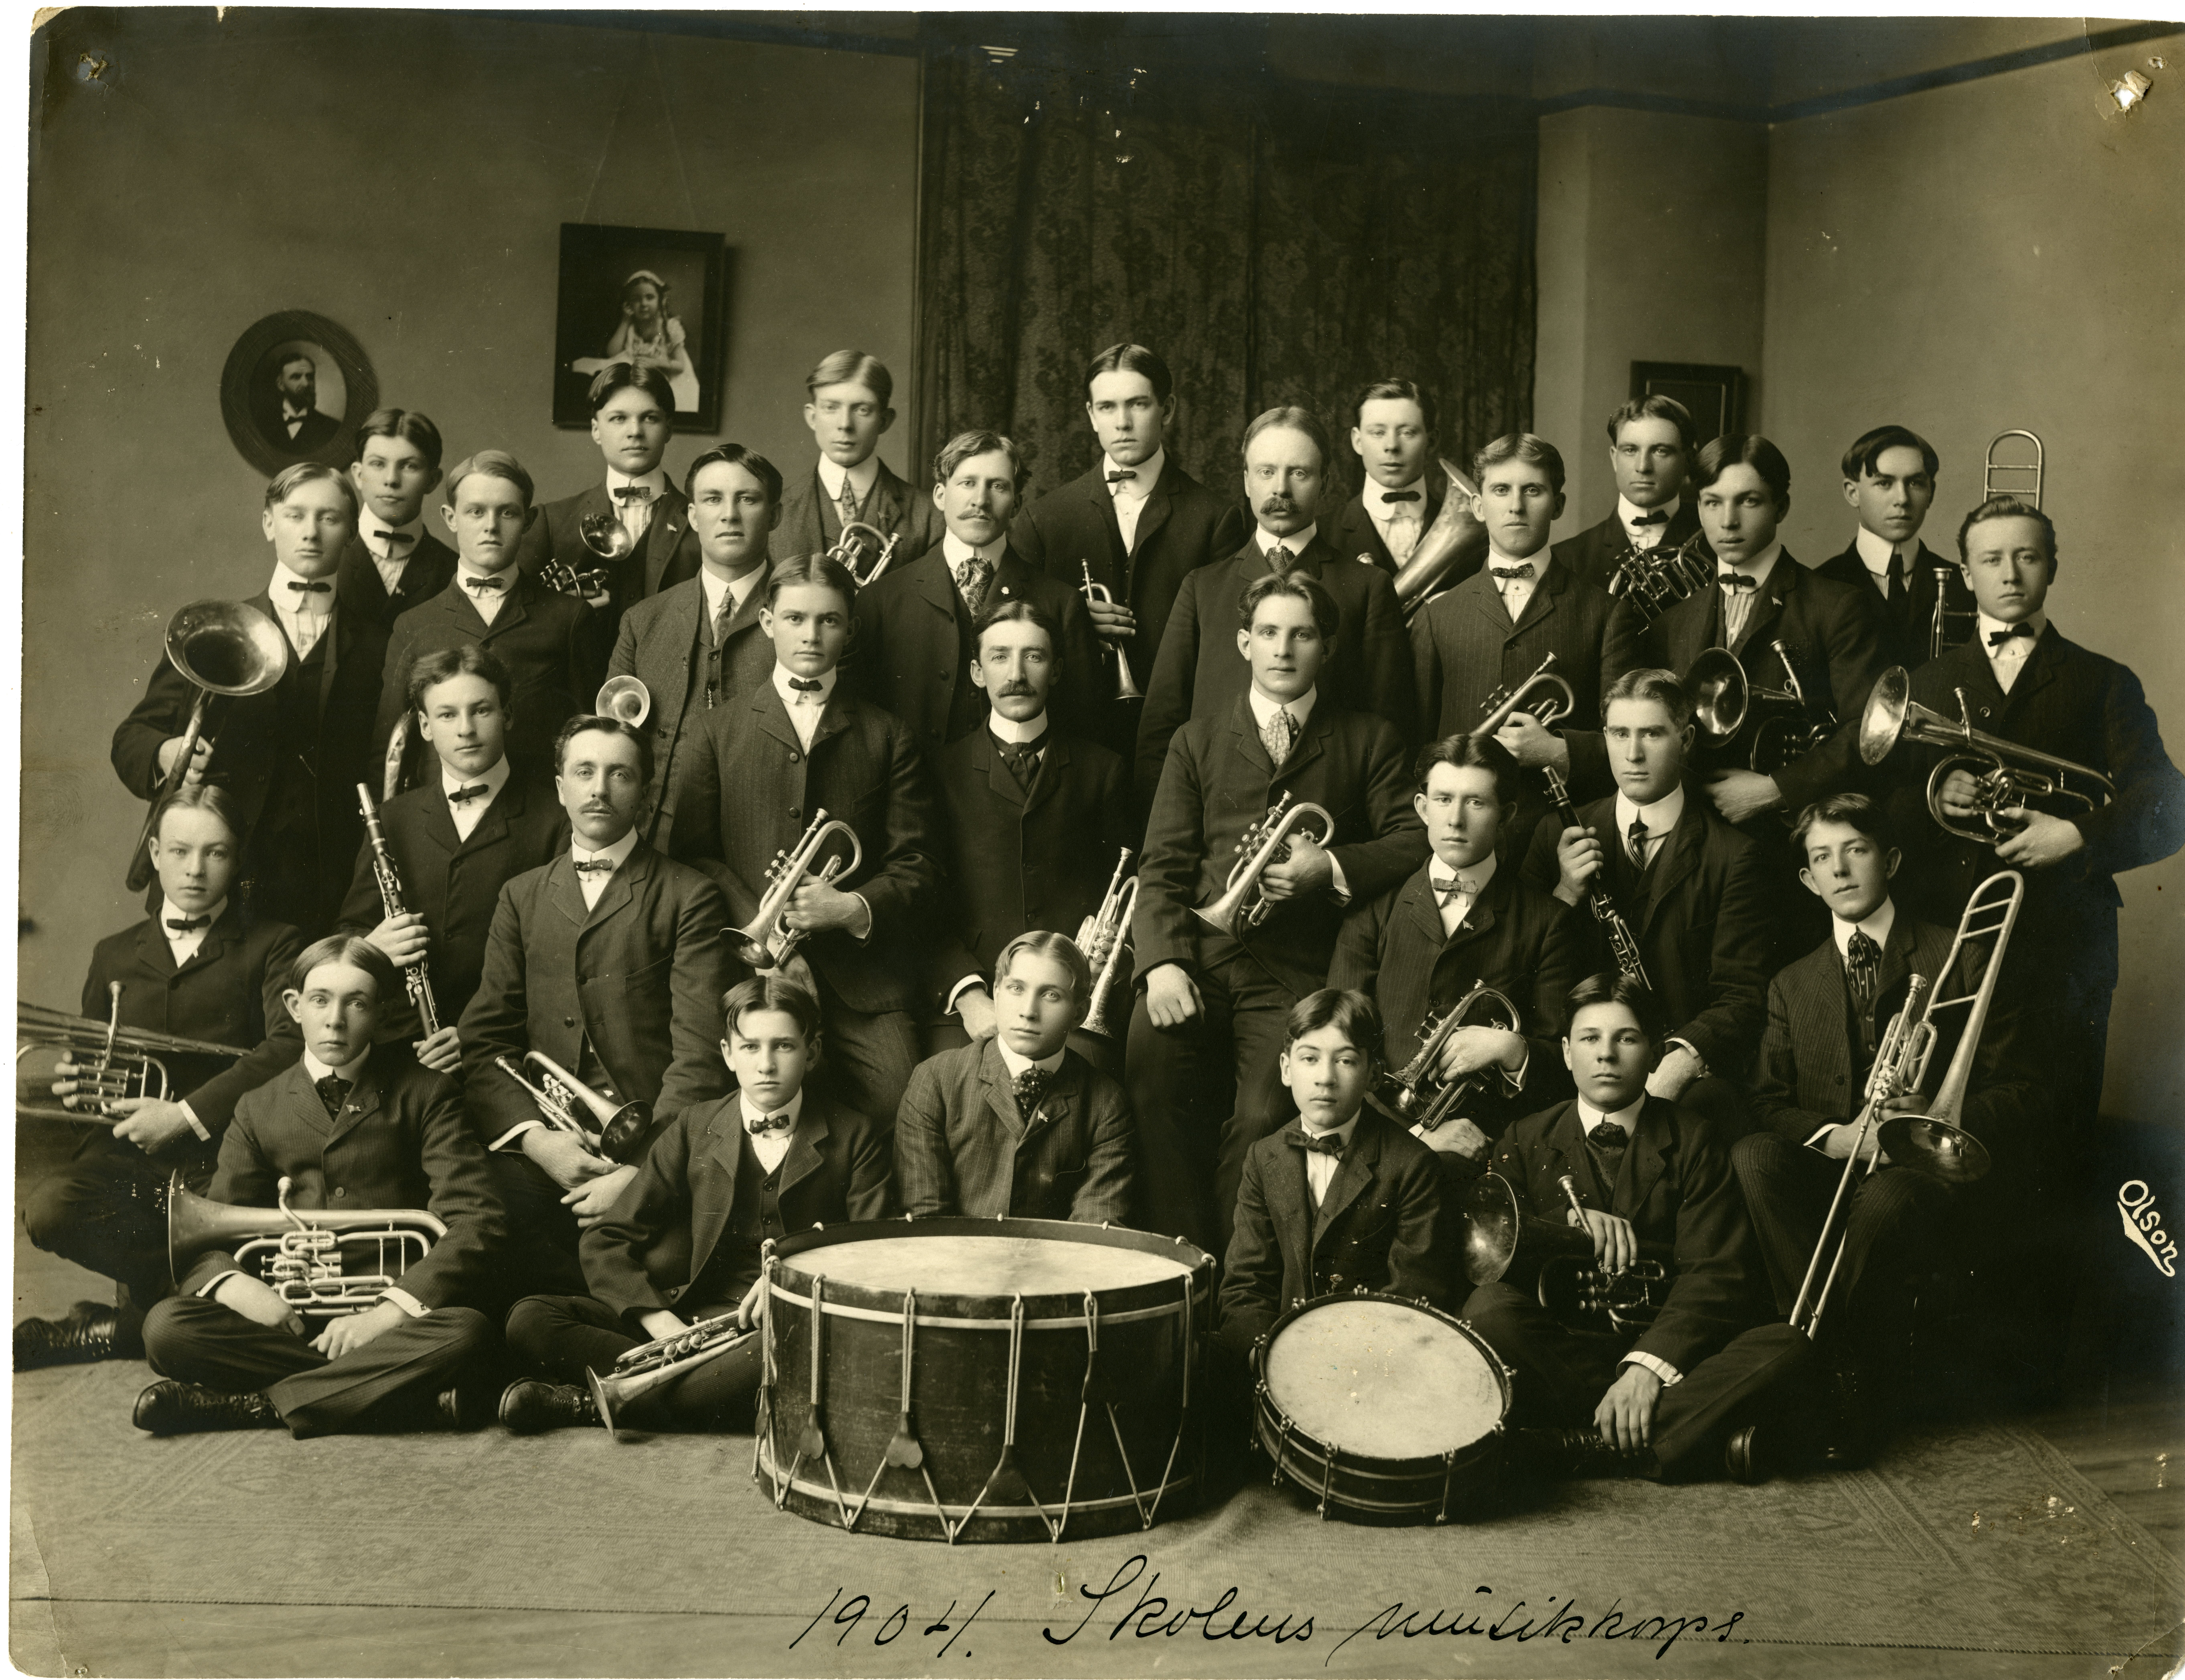 Large group of men with instruments pose for a photo.